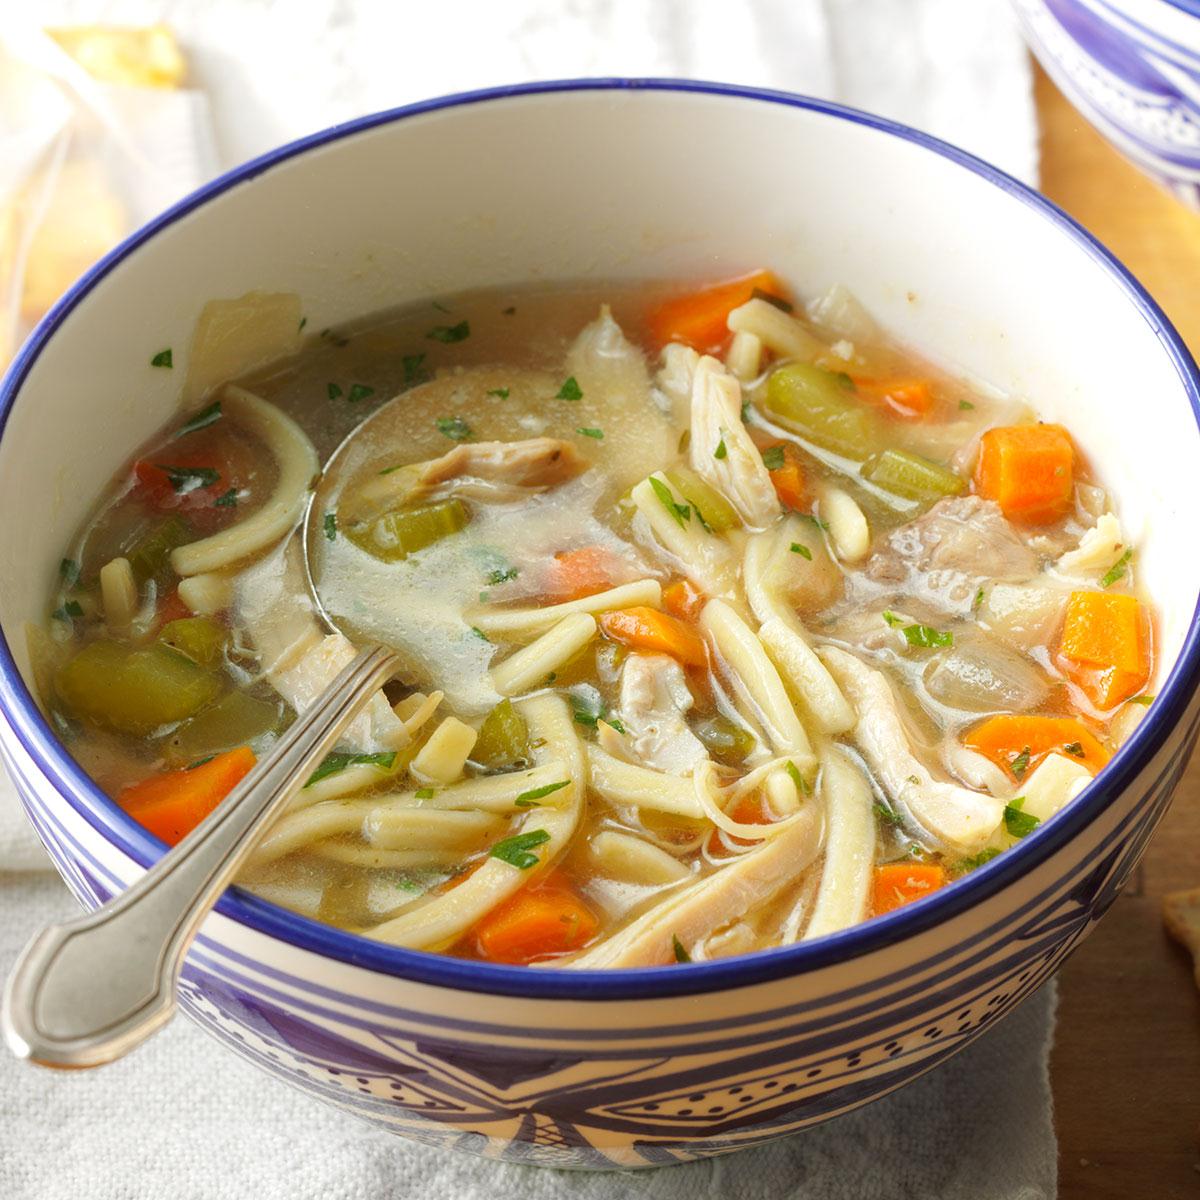 Mom's best chicken noodle soup is highly customizable. Add as many vegetables as you like, and make sure to put enough water!